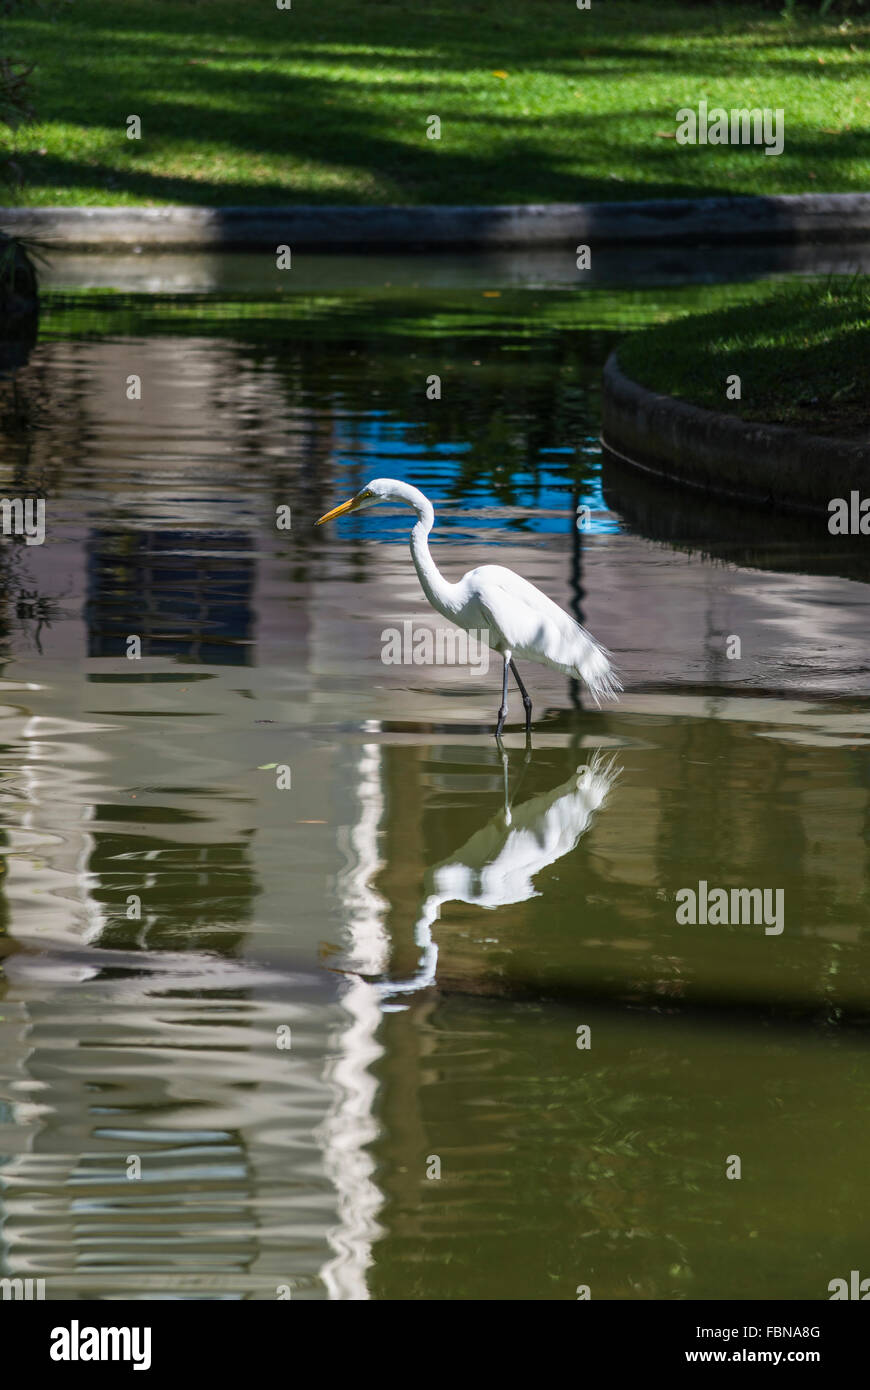 White heron in the Grounds of Catete Palace, Rio de Janeiro, Brazil Stock Photo